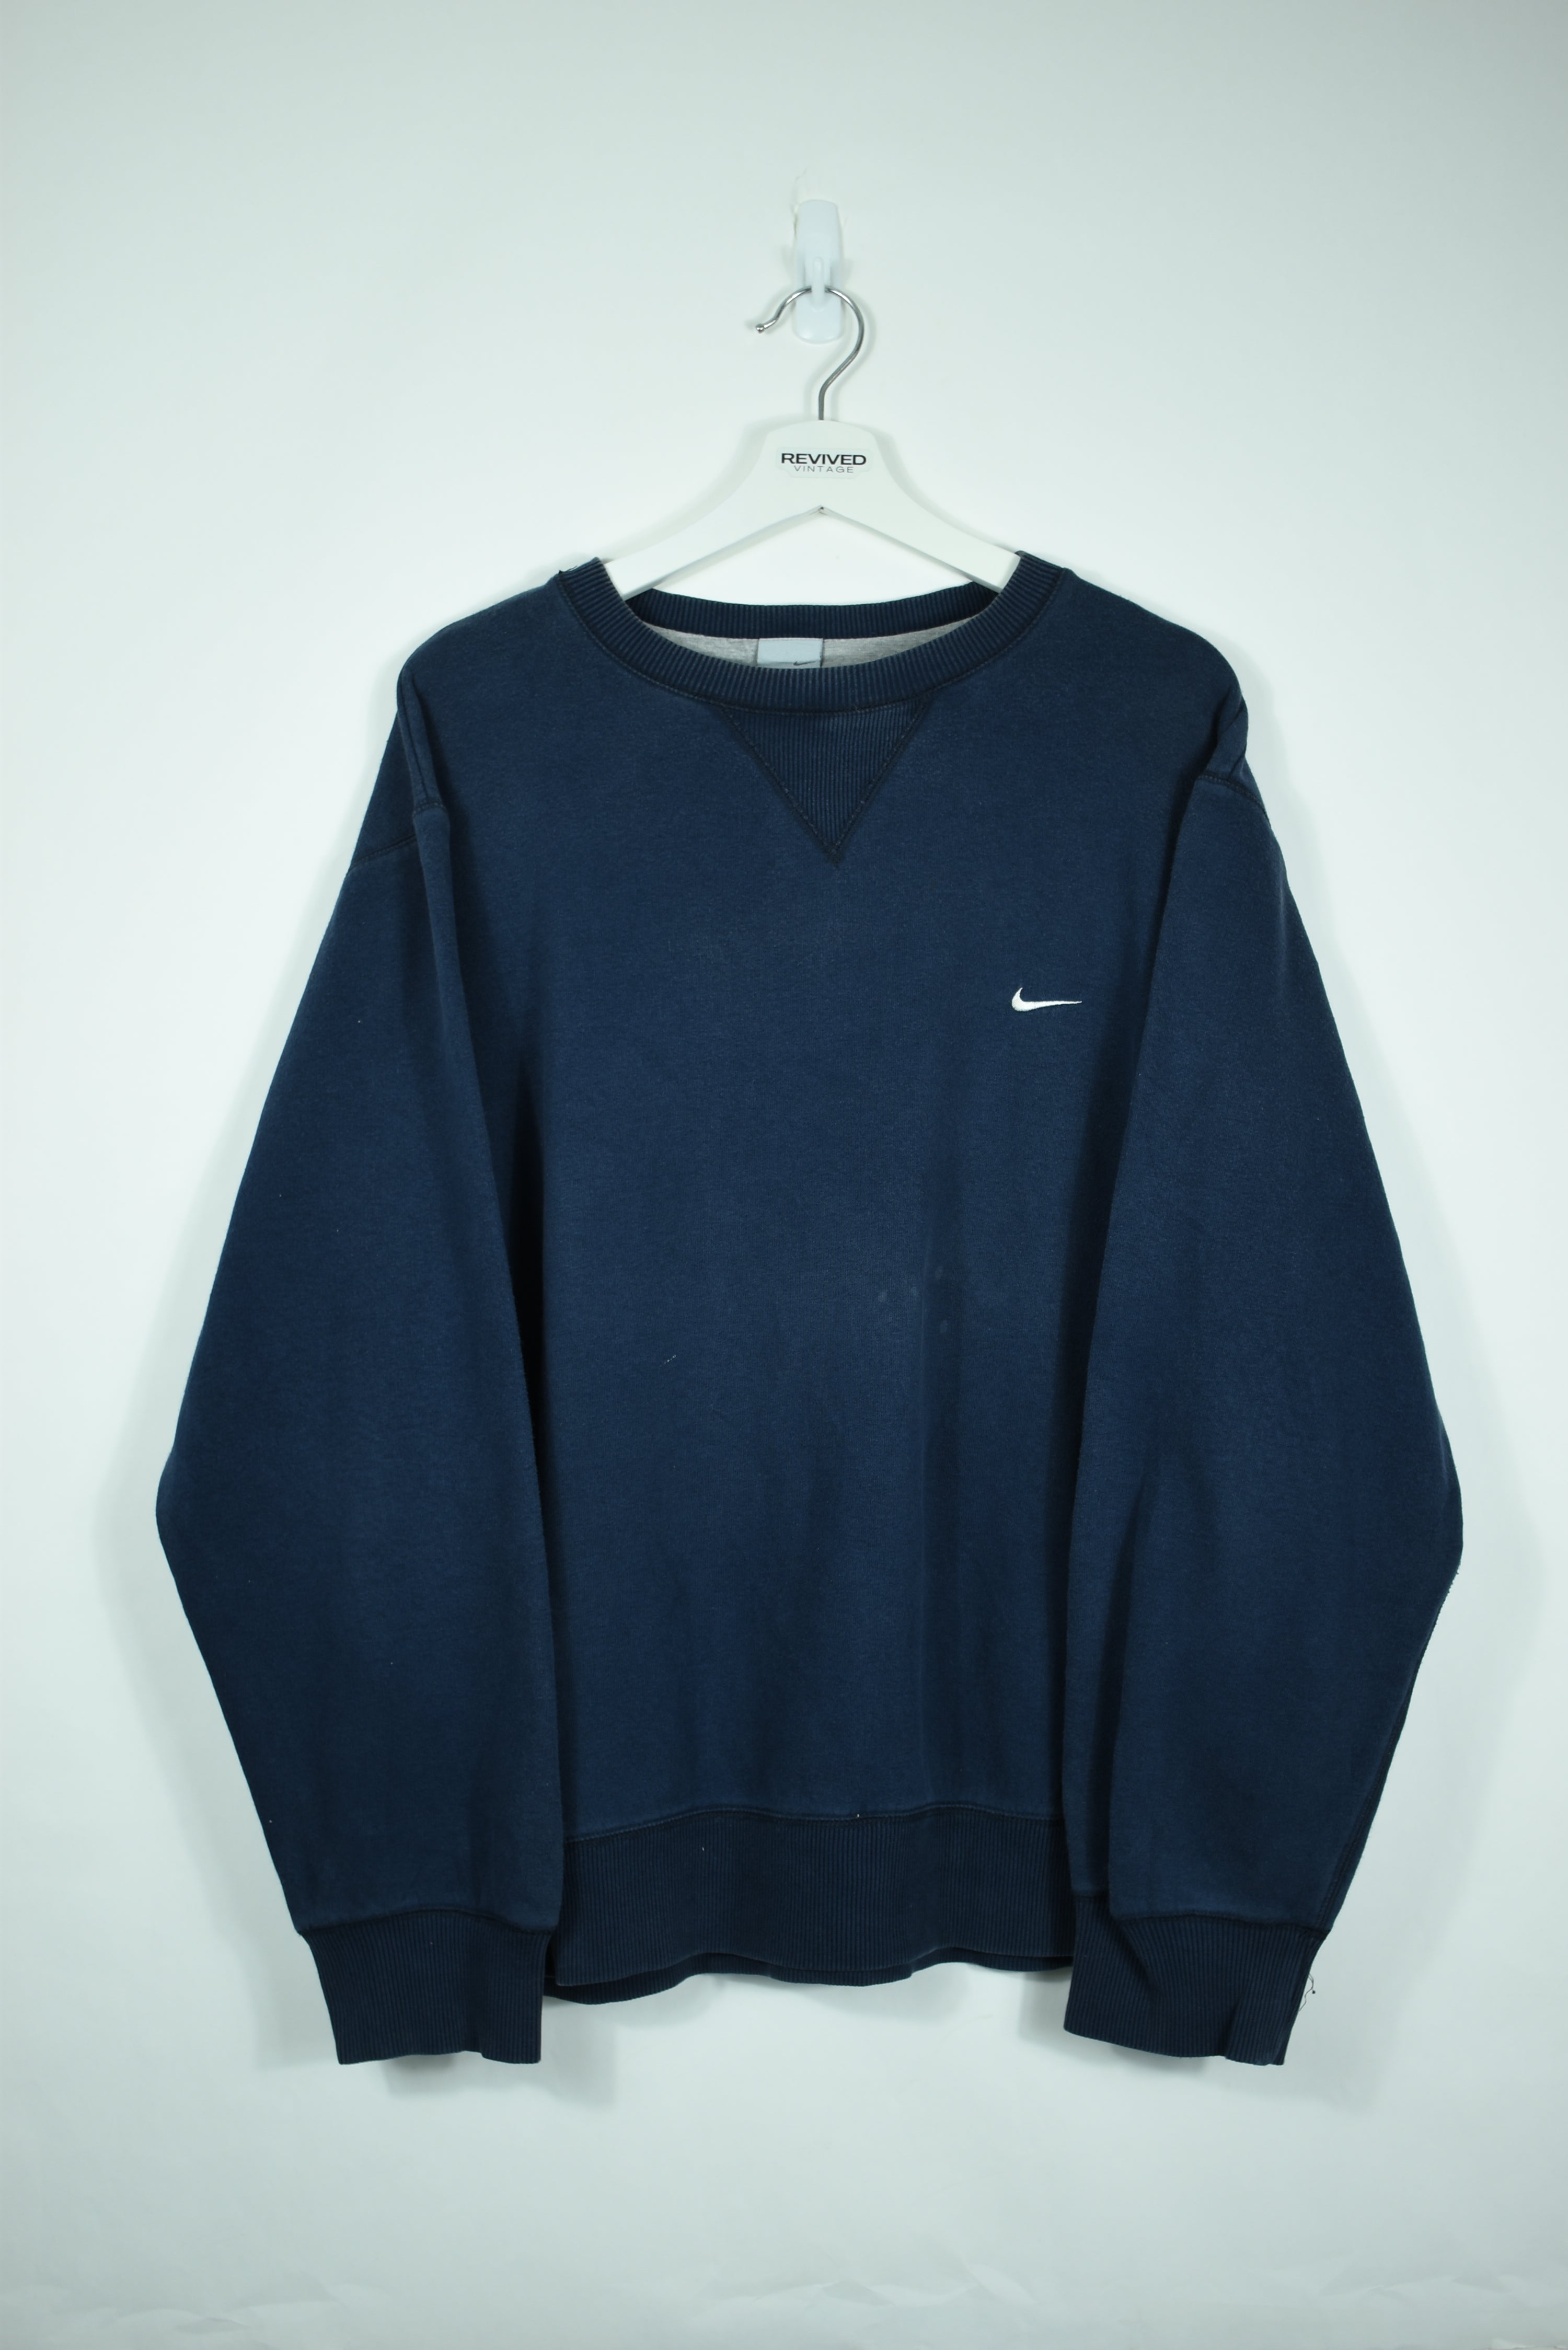 VINTAGE NIKE EMBROIDERY SMALL SWOOSH NAVY LARGE